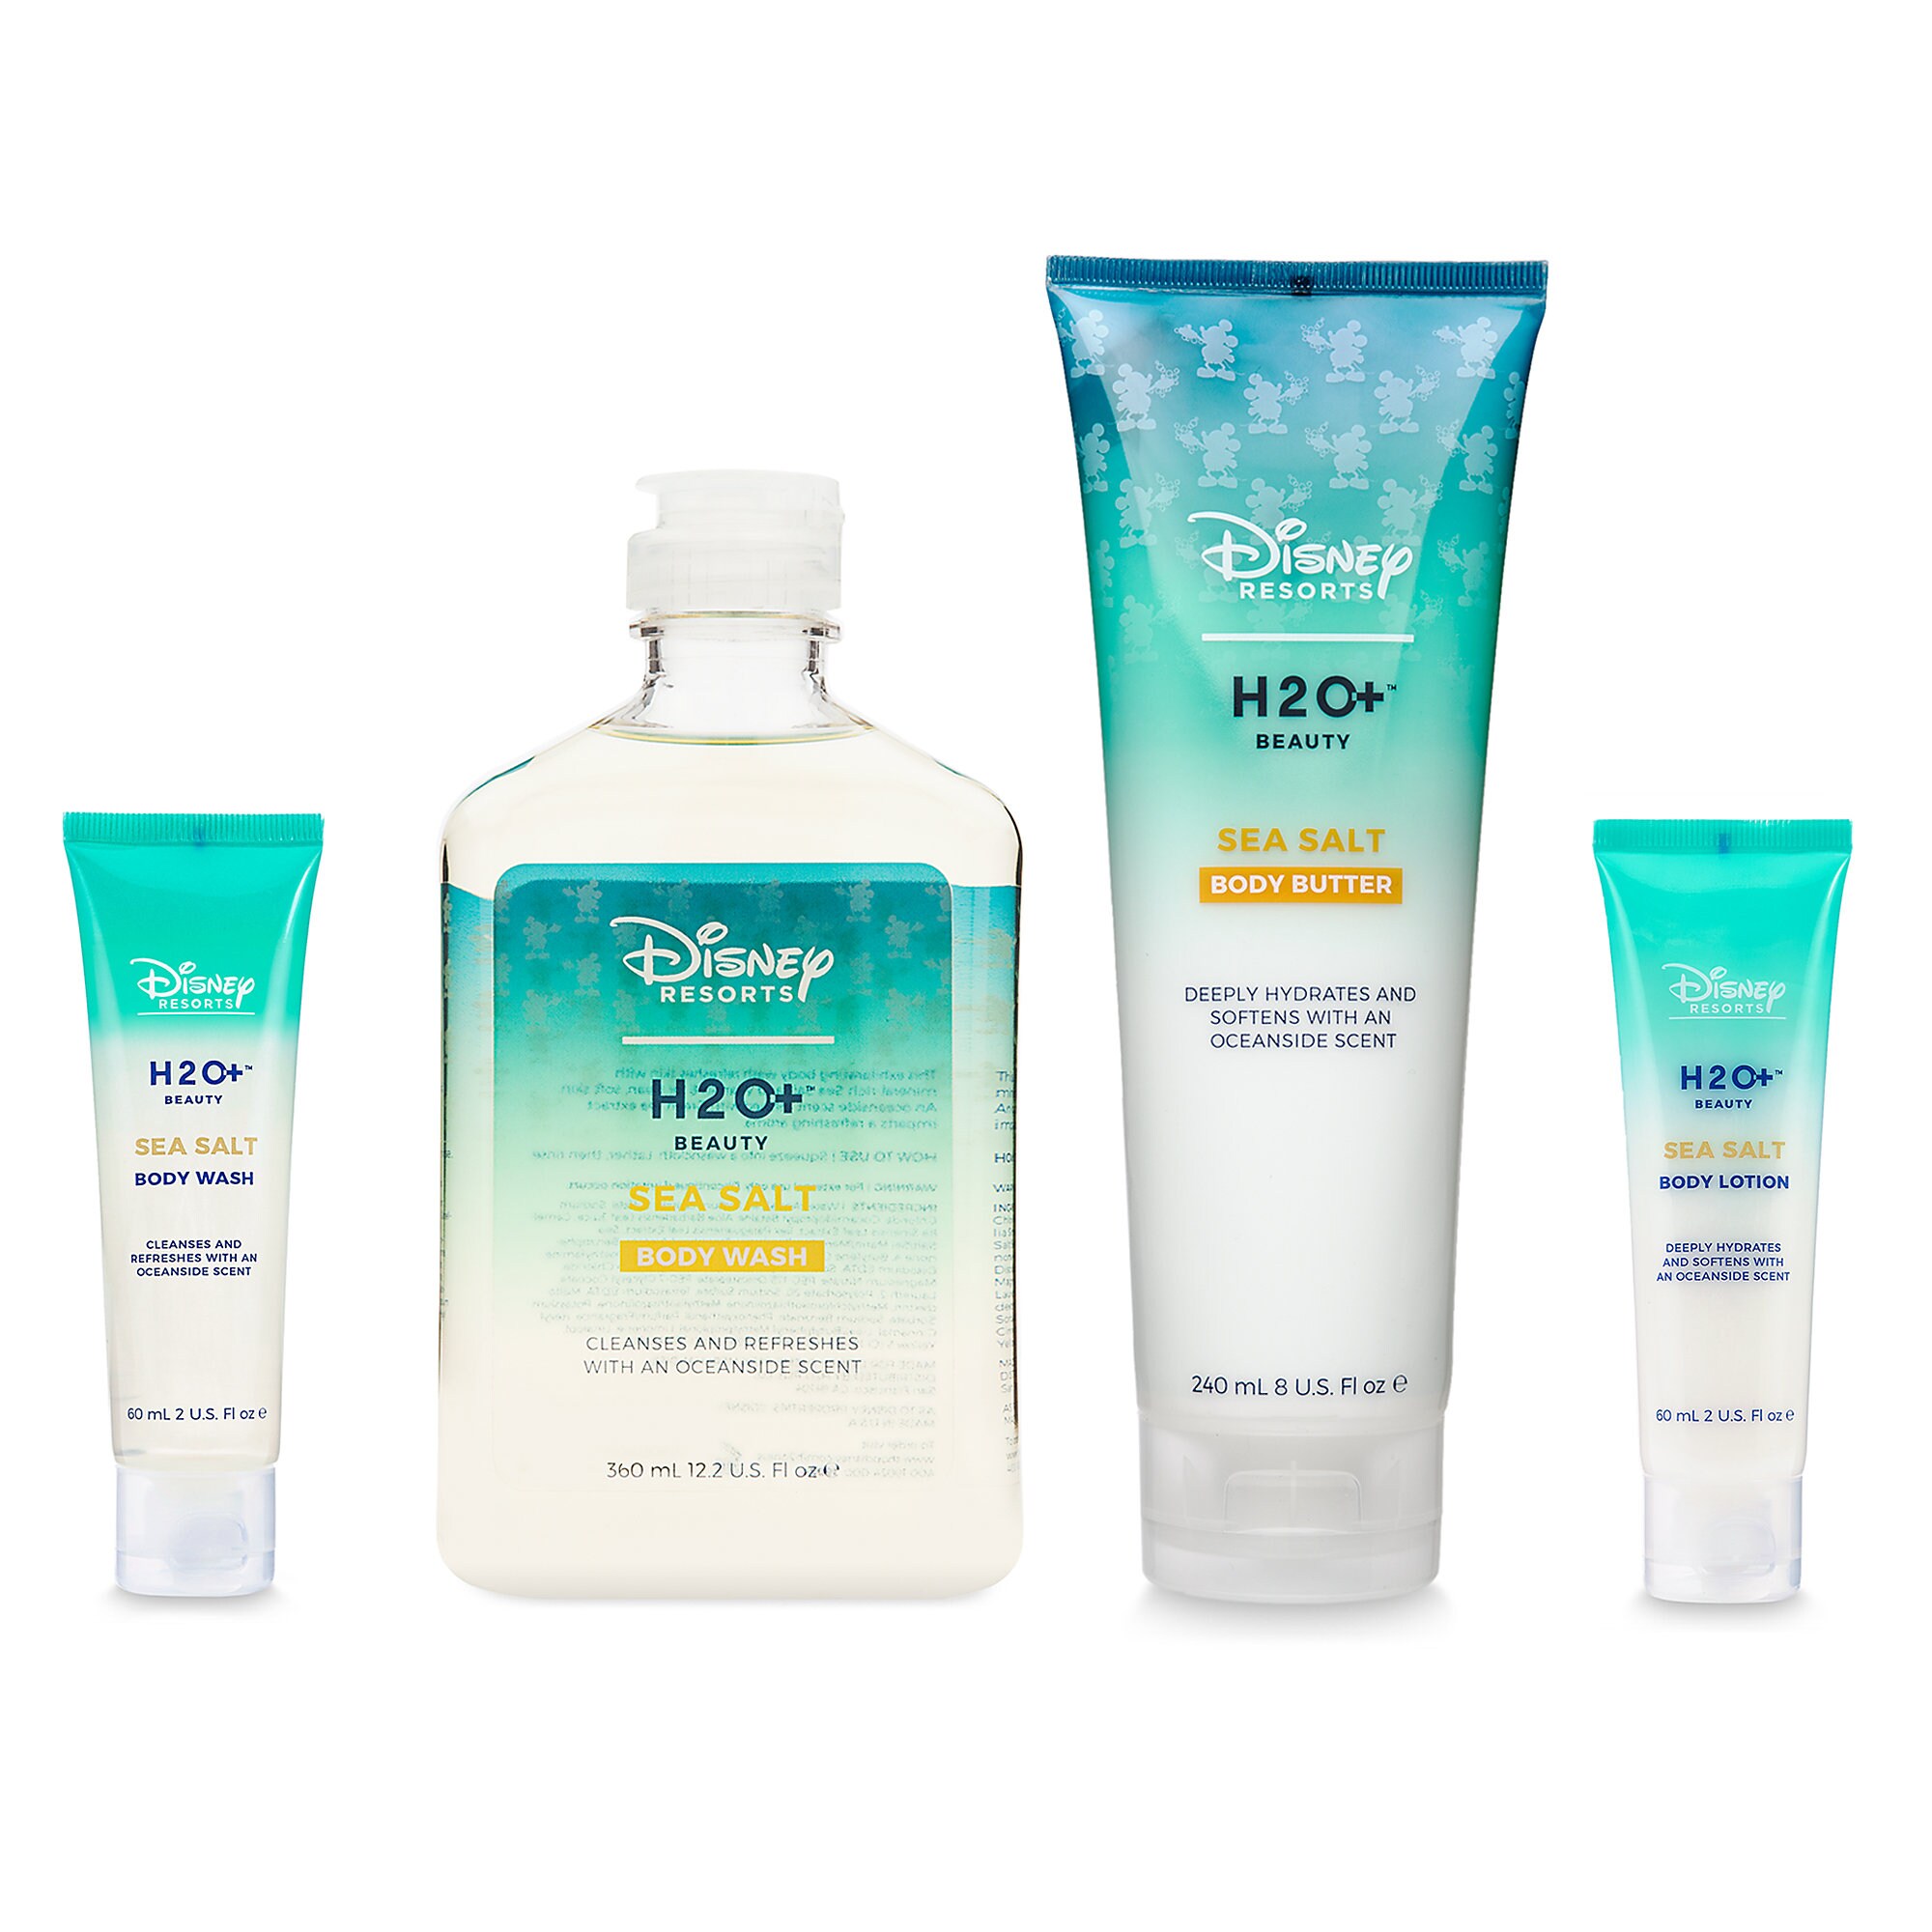 Sea Salt Body Wash, Body Butter and Body Lotion Set by H2O+